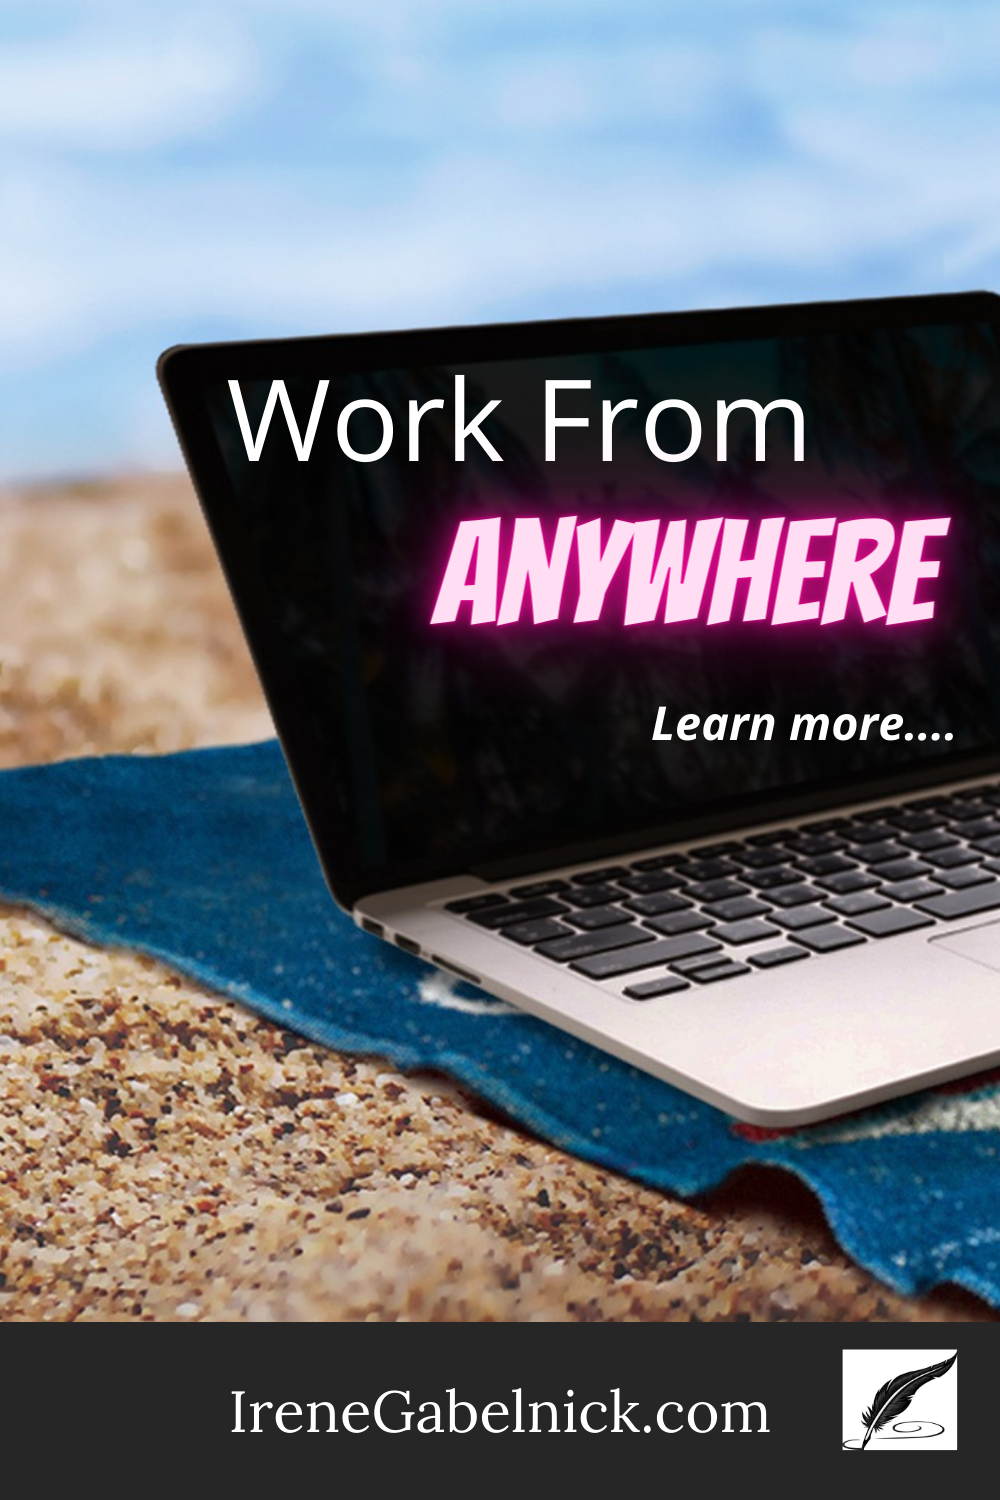 Work from anywhere... #workfromhome #workfromanywhere #beach #bloggingtips #coursecreators #Create #Sell #courses #startablog #blogging #business #summit #Free #entrepreneurs #freedom #lifestyle 